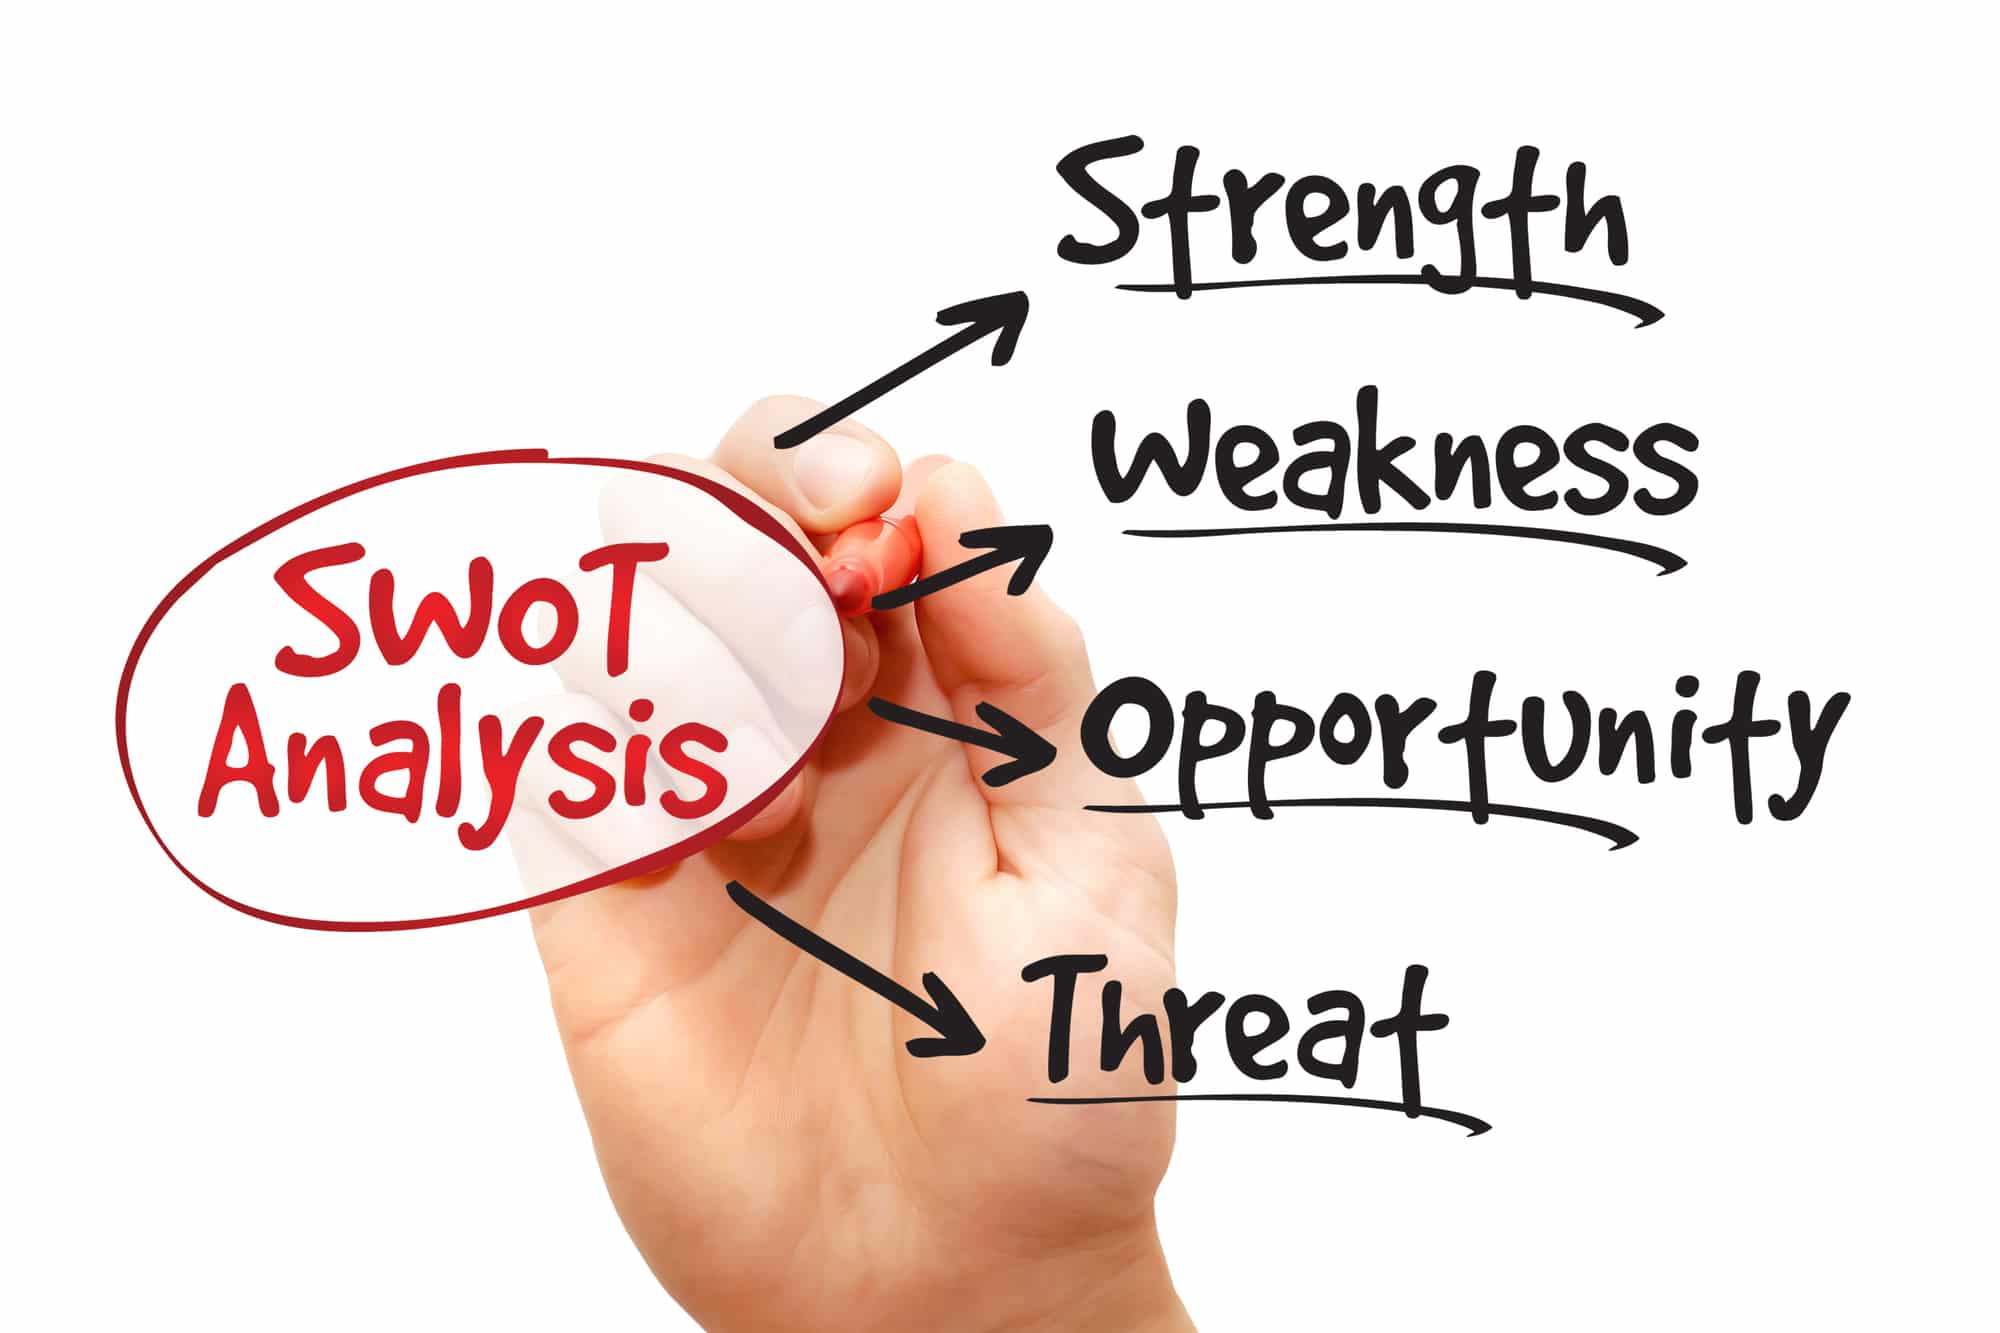 alternatives-to-swot-analysis-advantages-outdated